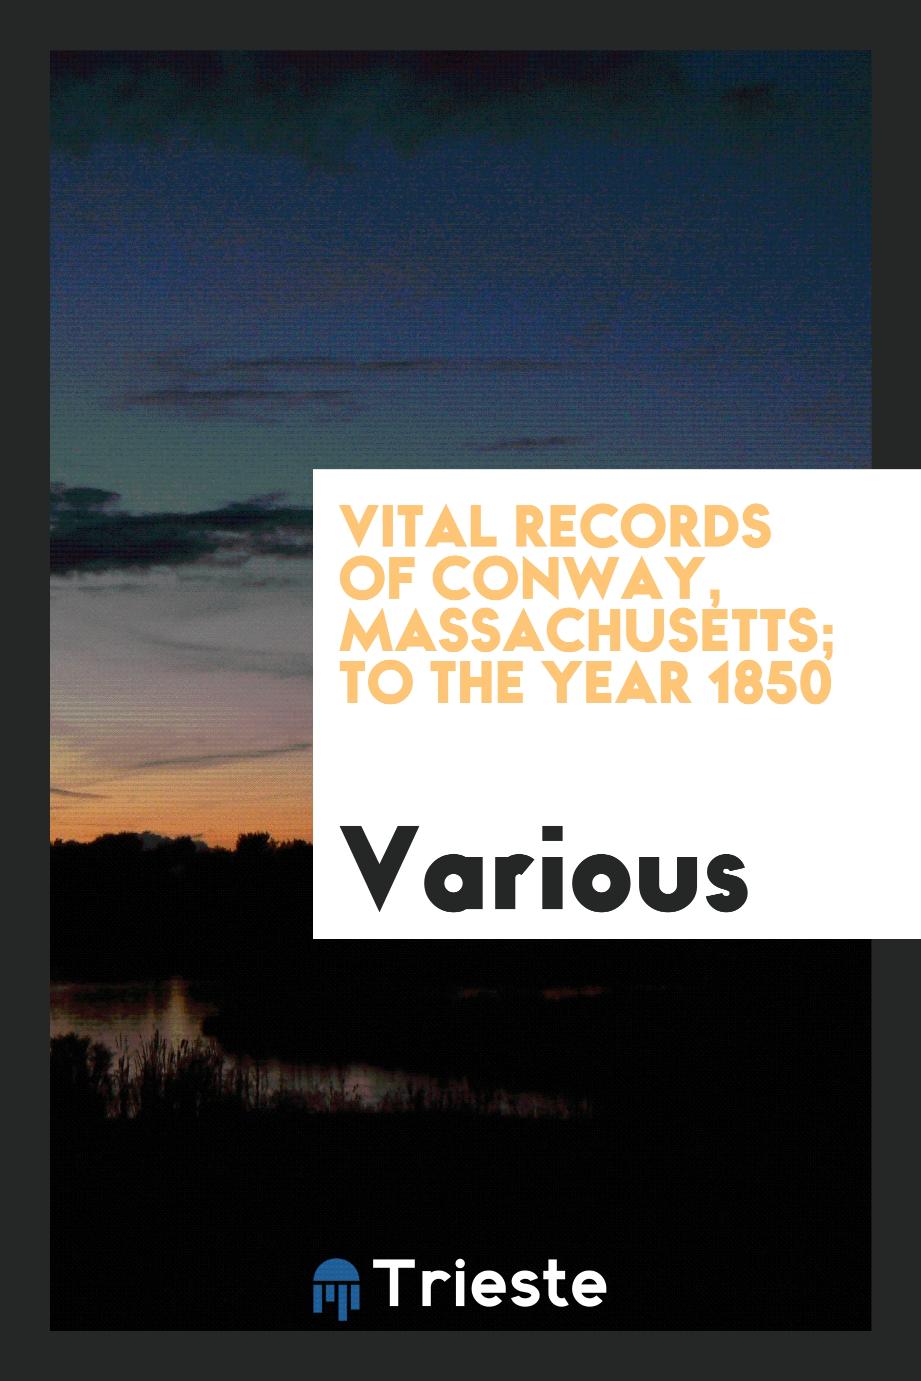 Vital records of Conway, Massachusetts; to the year 1850